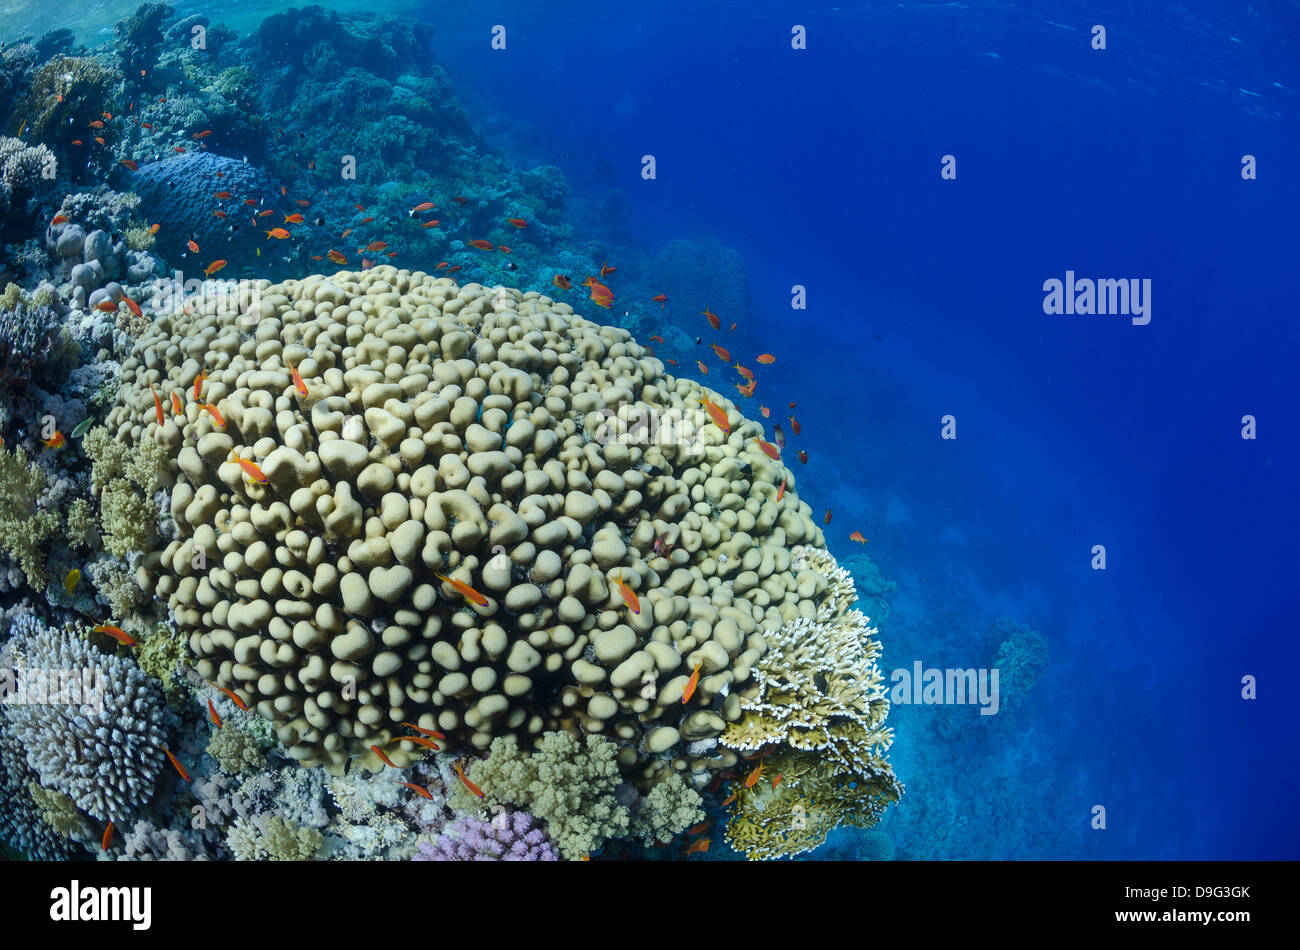 Tropical coral reef scene, Ras Mohammed National Park, off Sharm el-Sheikh, Sinai, Red Sea, Egypt, Africa Stock Photo